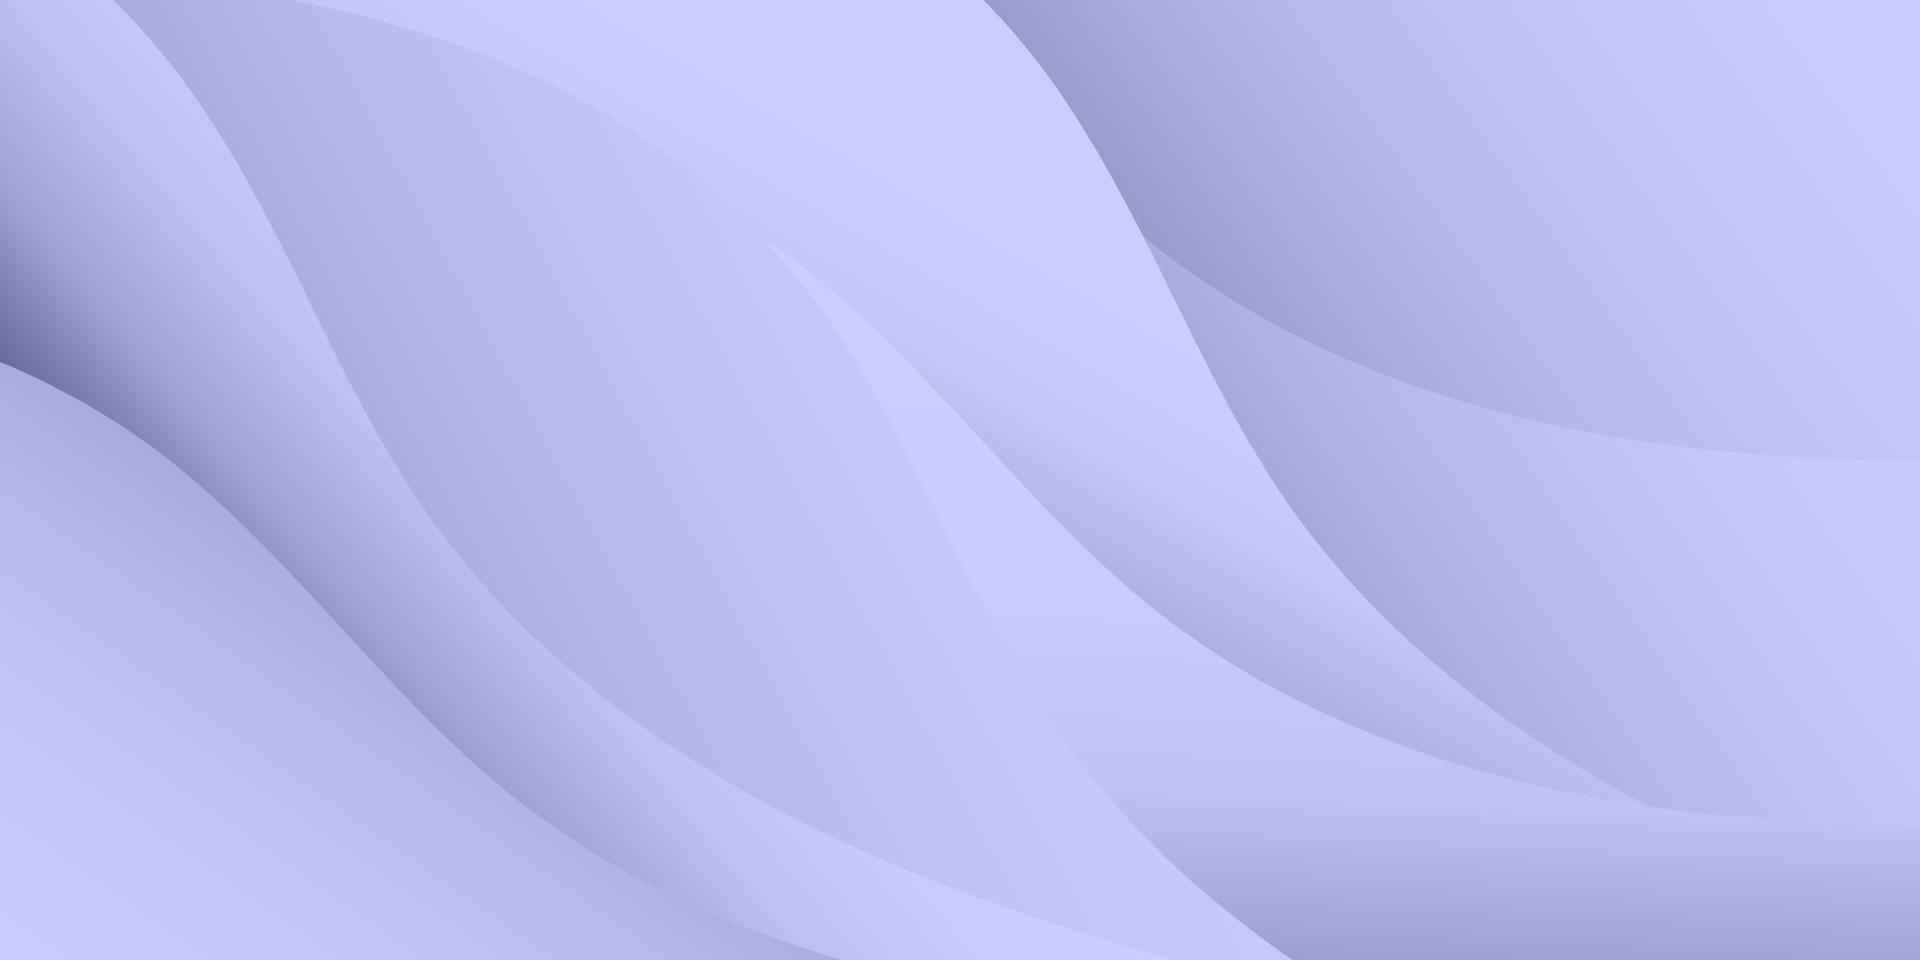 purple abstract background vector